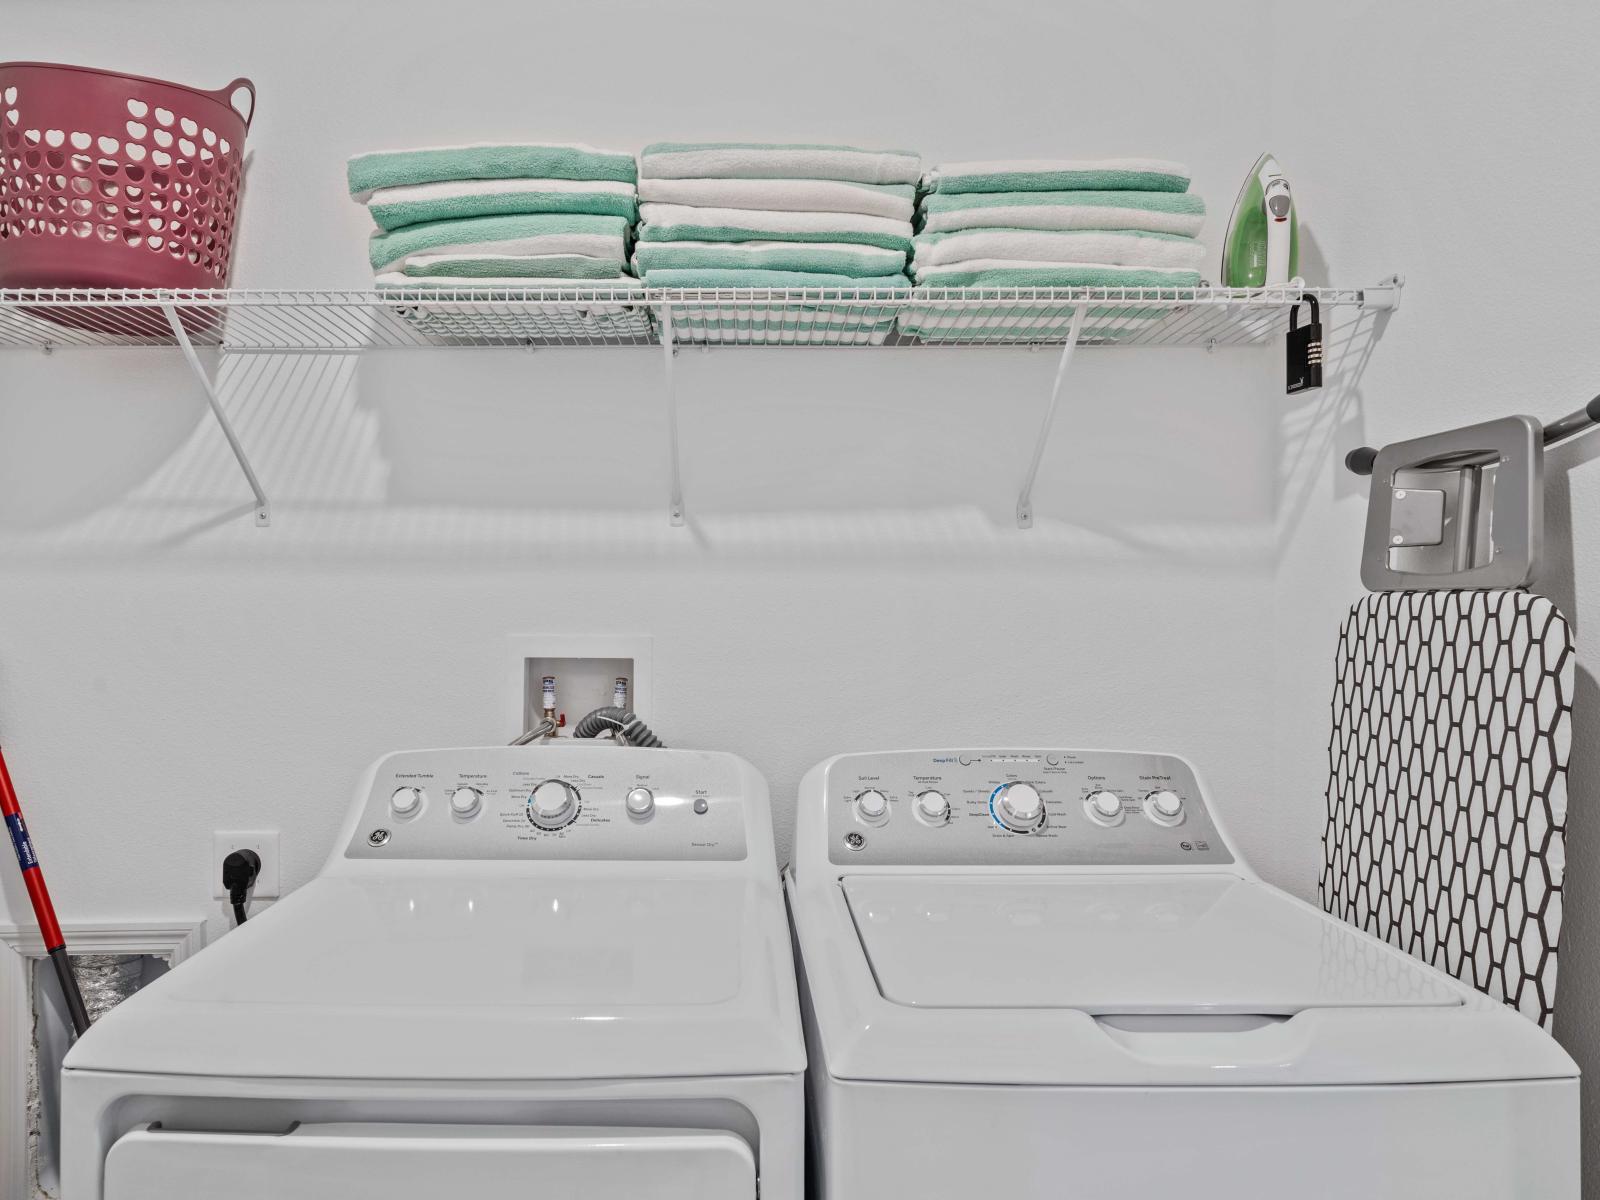 Laundry Area of the Home in Davenport Florida - Ensures that your clothes stay fresh and clean throughout your stay  - A thoughtful amenity for your comfort